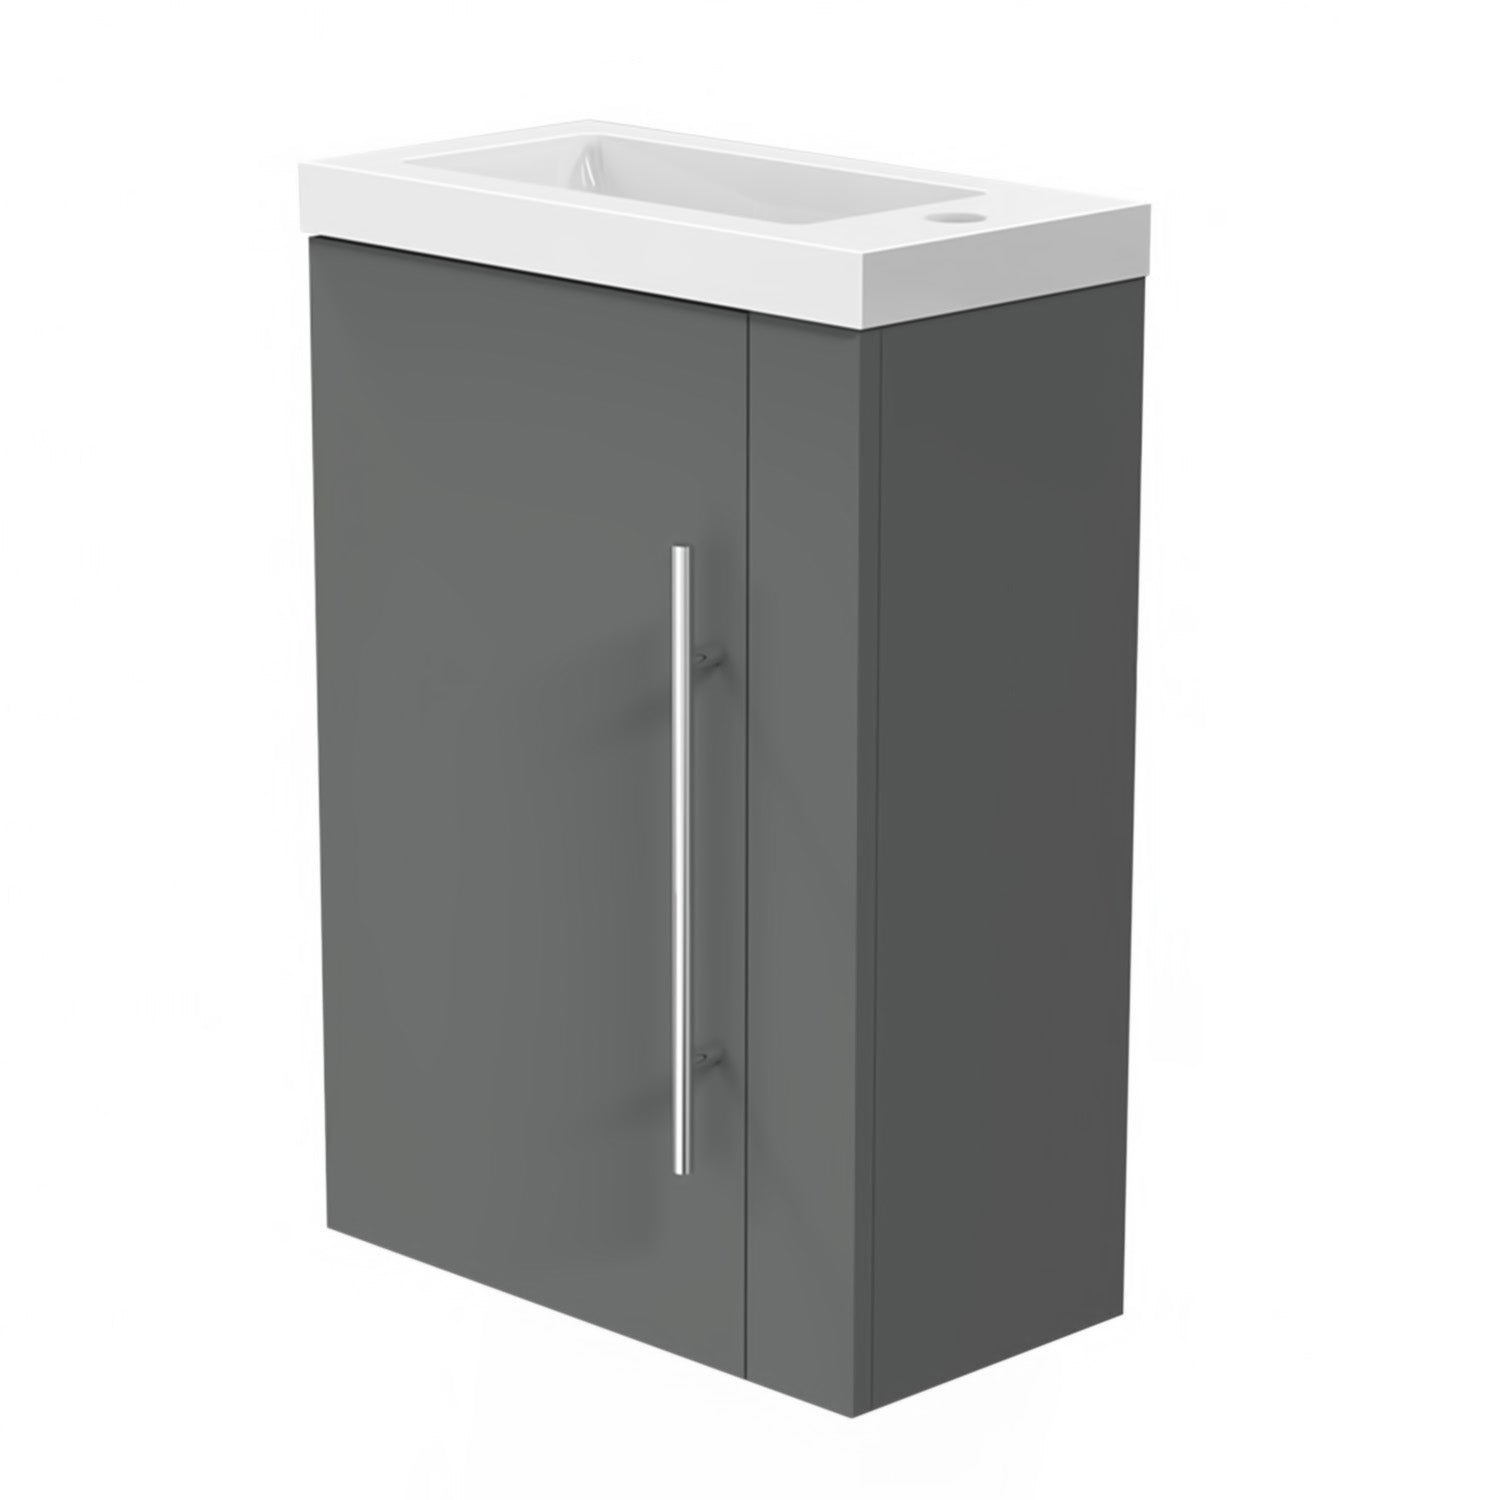 440mm Cloakroom Bathroom Vanity Unit with Basin Wall Hung White/Grey